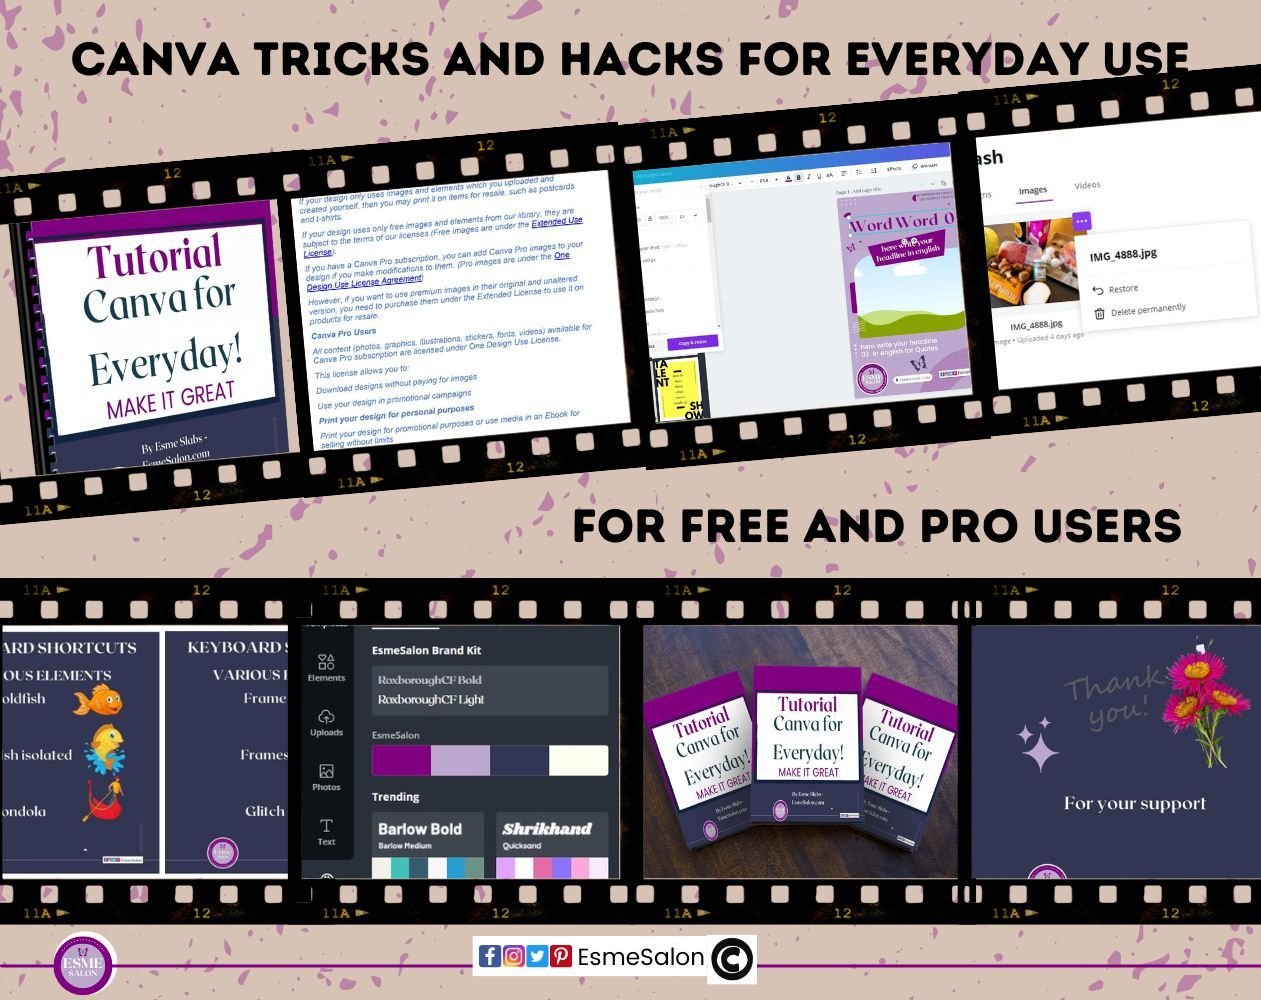 An image of various Canva Tricks and Hacks for Everyday Use